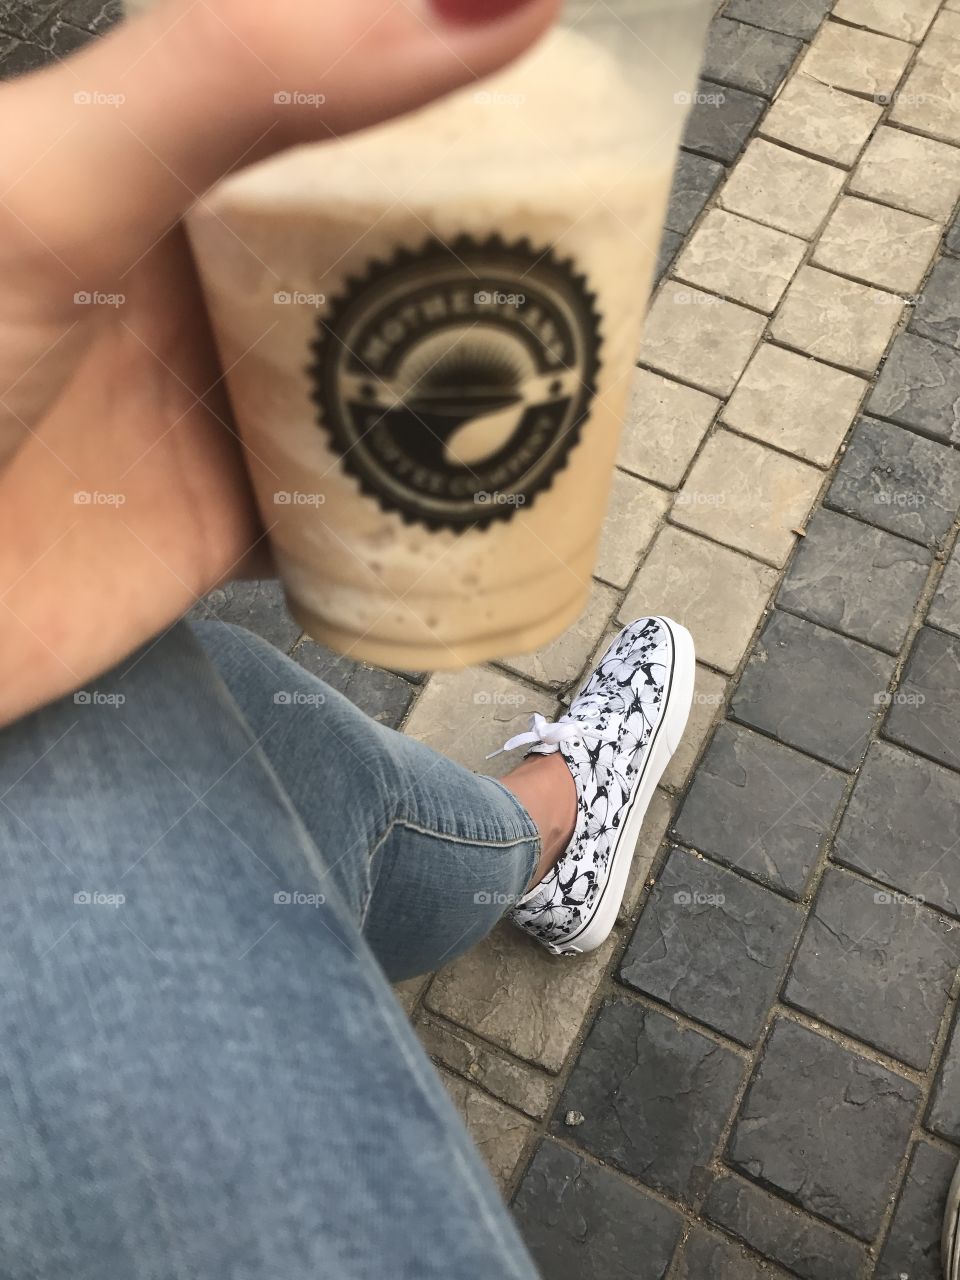 But first , Coffee 